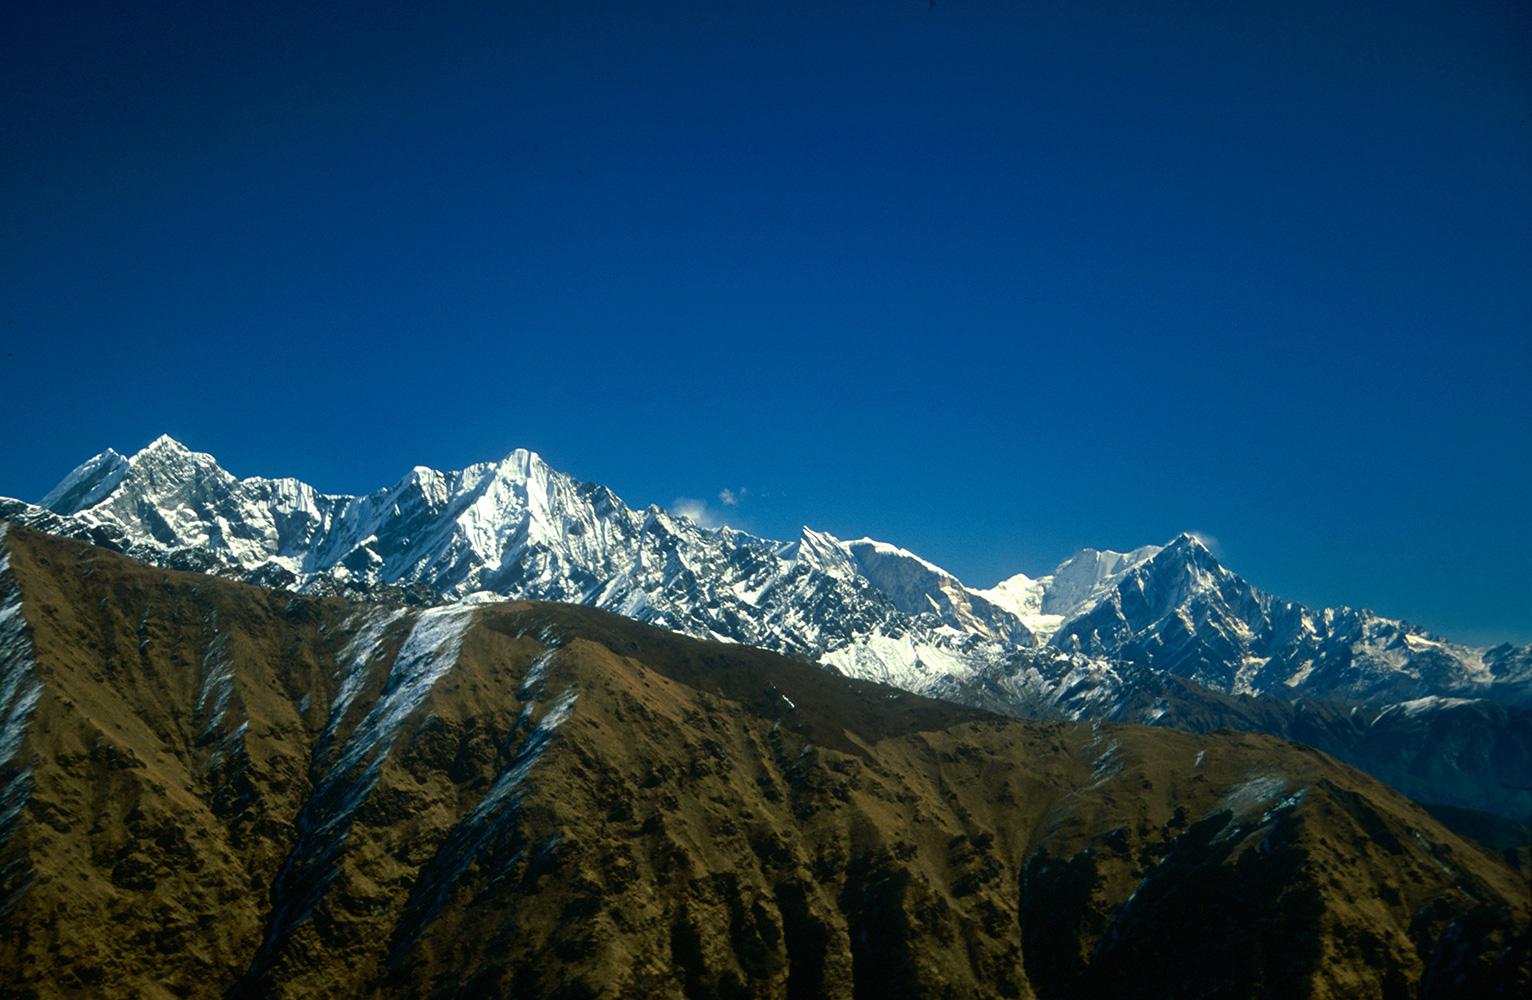 The west faces of (l to r) Manapati (6380m), Jirbang (6062m), Fang (7647m) Annapurna South (7219m) and Hiunchuli (6441m). Mountain vistas don't get any better!Nikon FM2, 105mm, Fuji Velvia